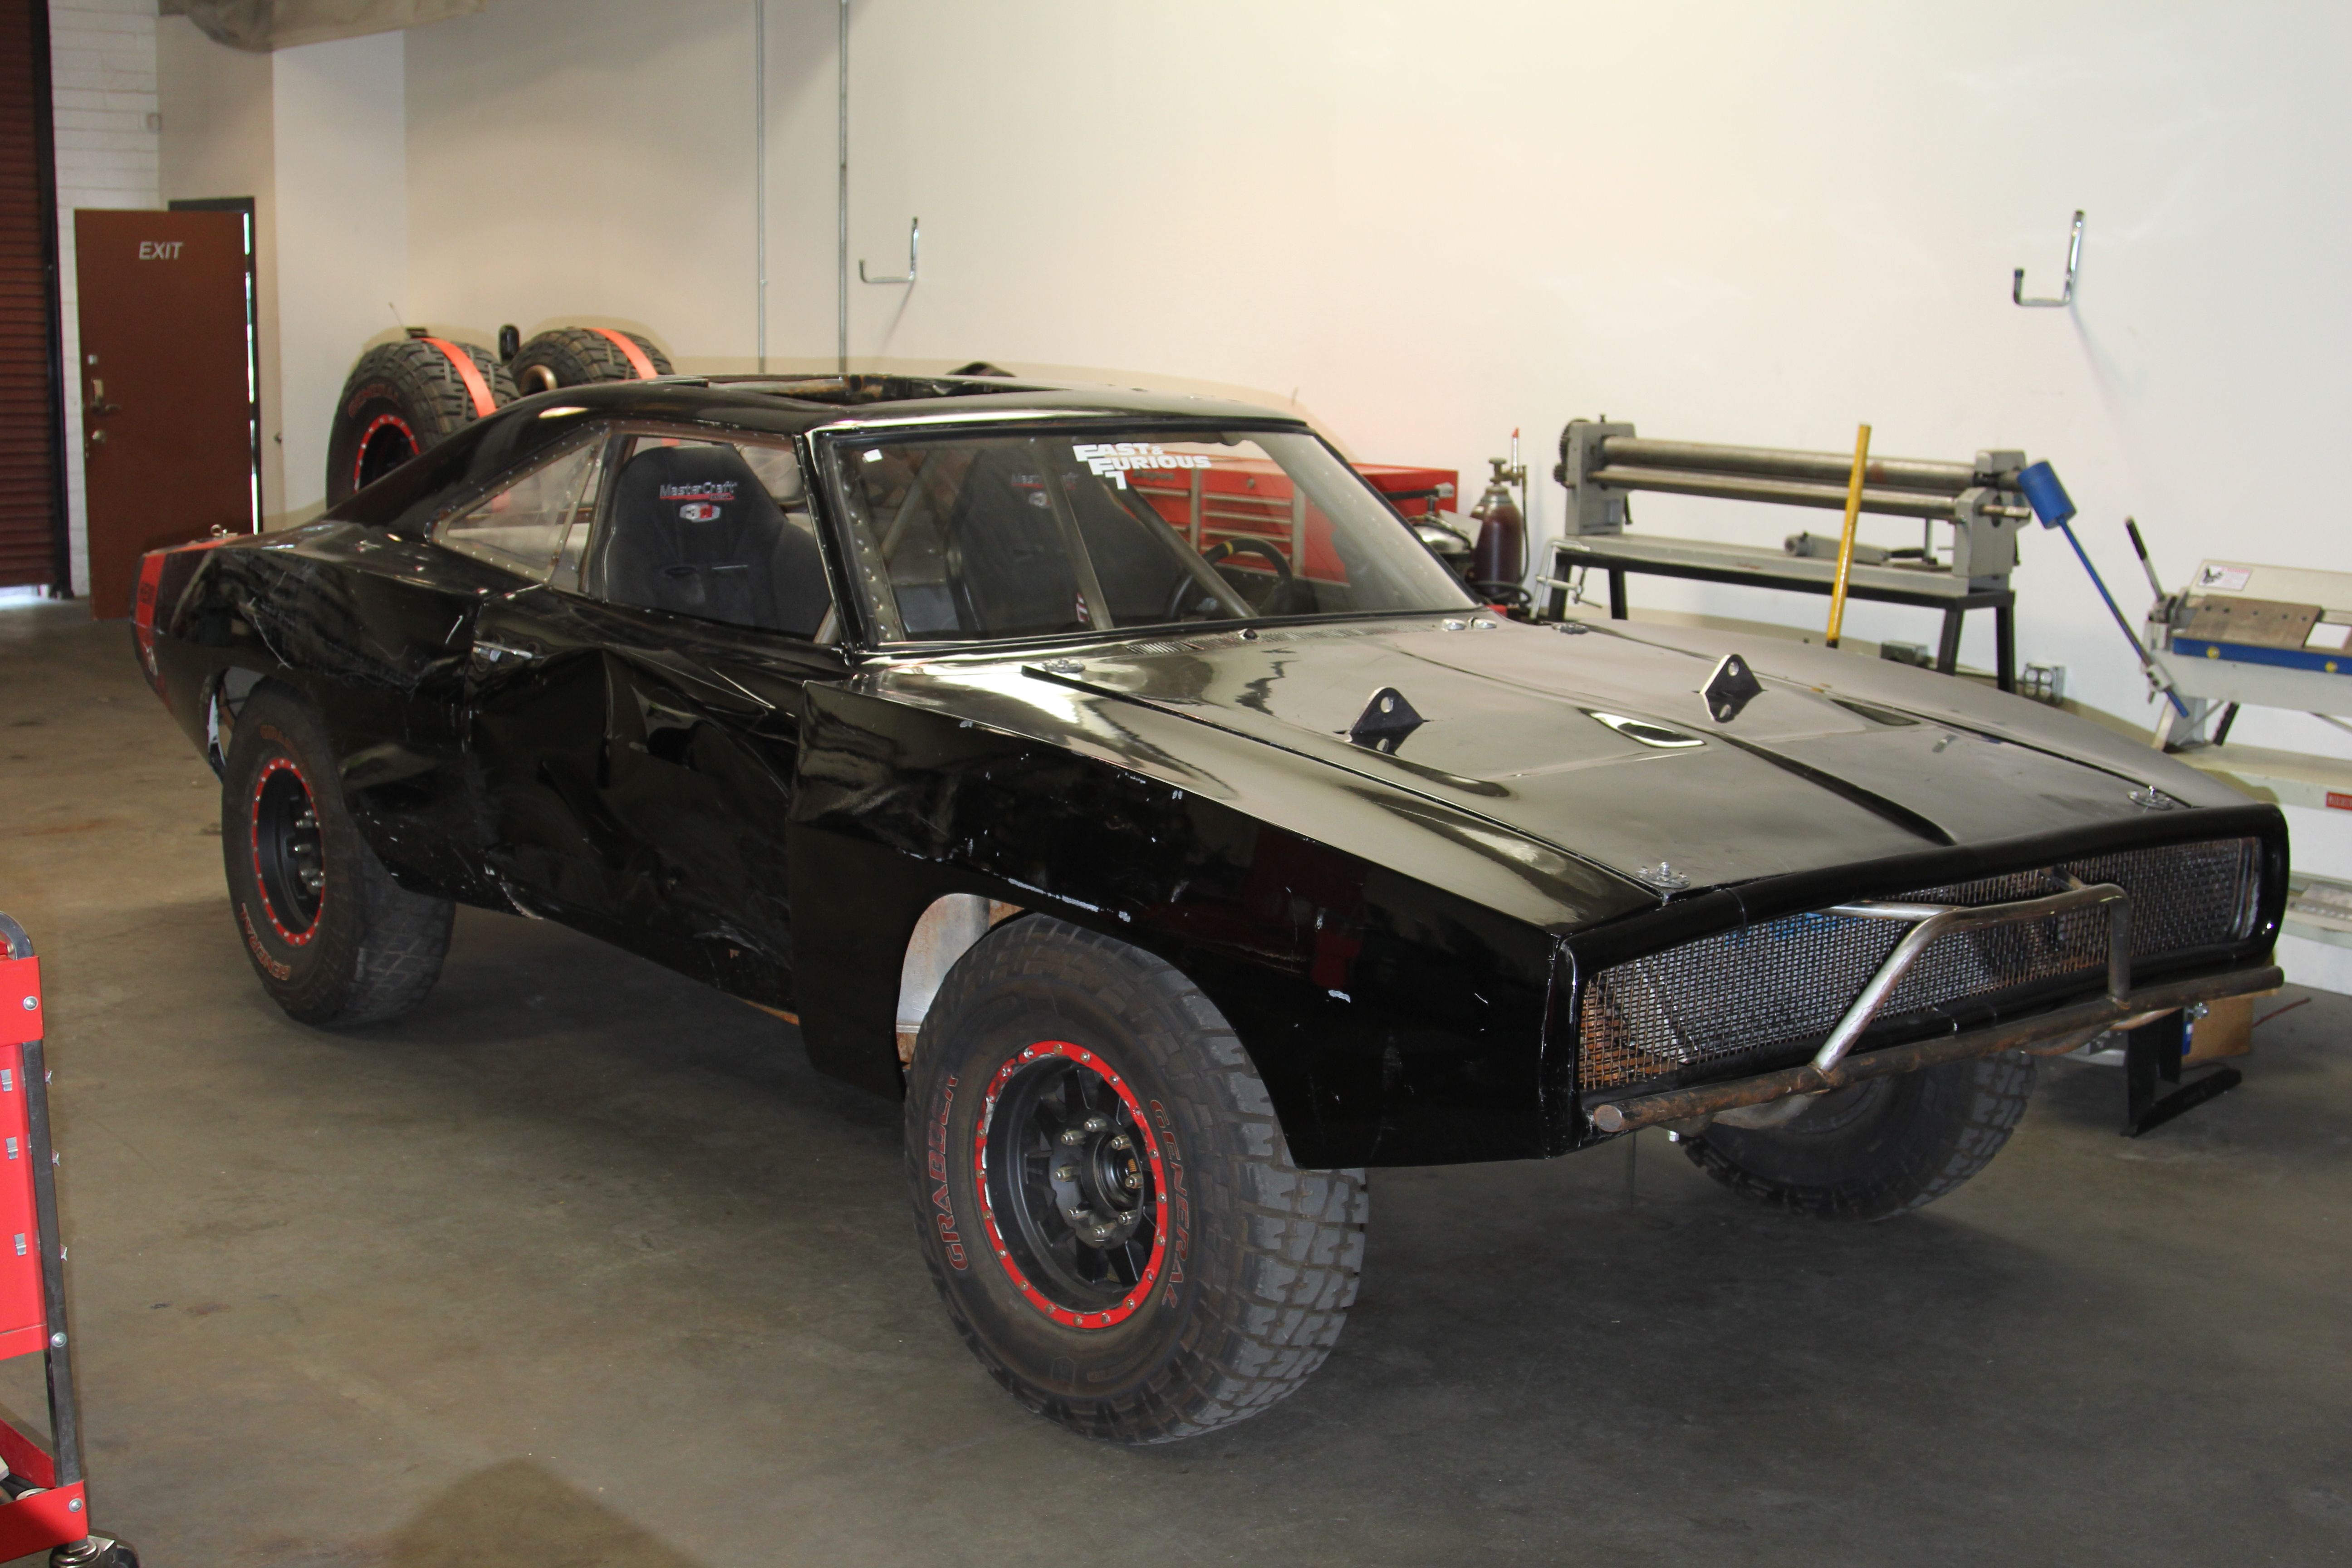 Furious 7 Features An Off Road Dodge Charger And It's Wicked